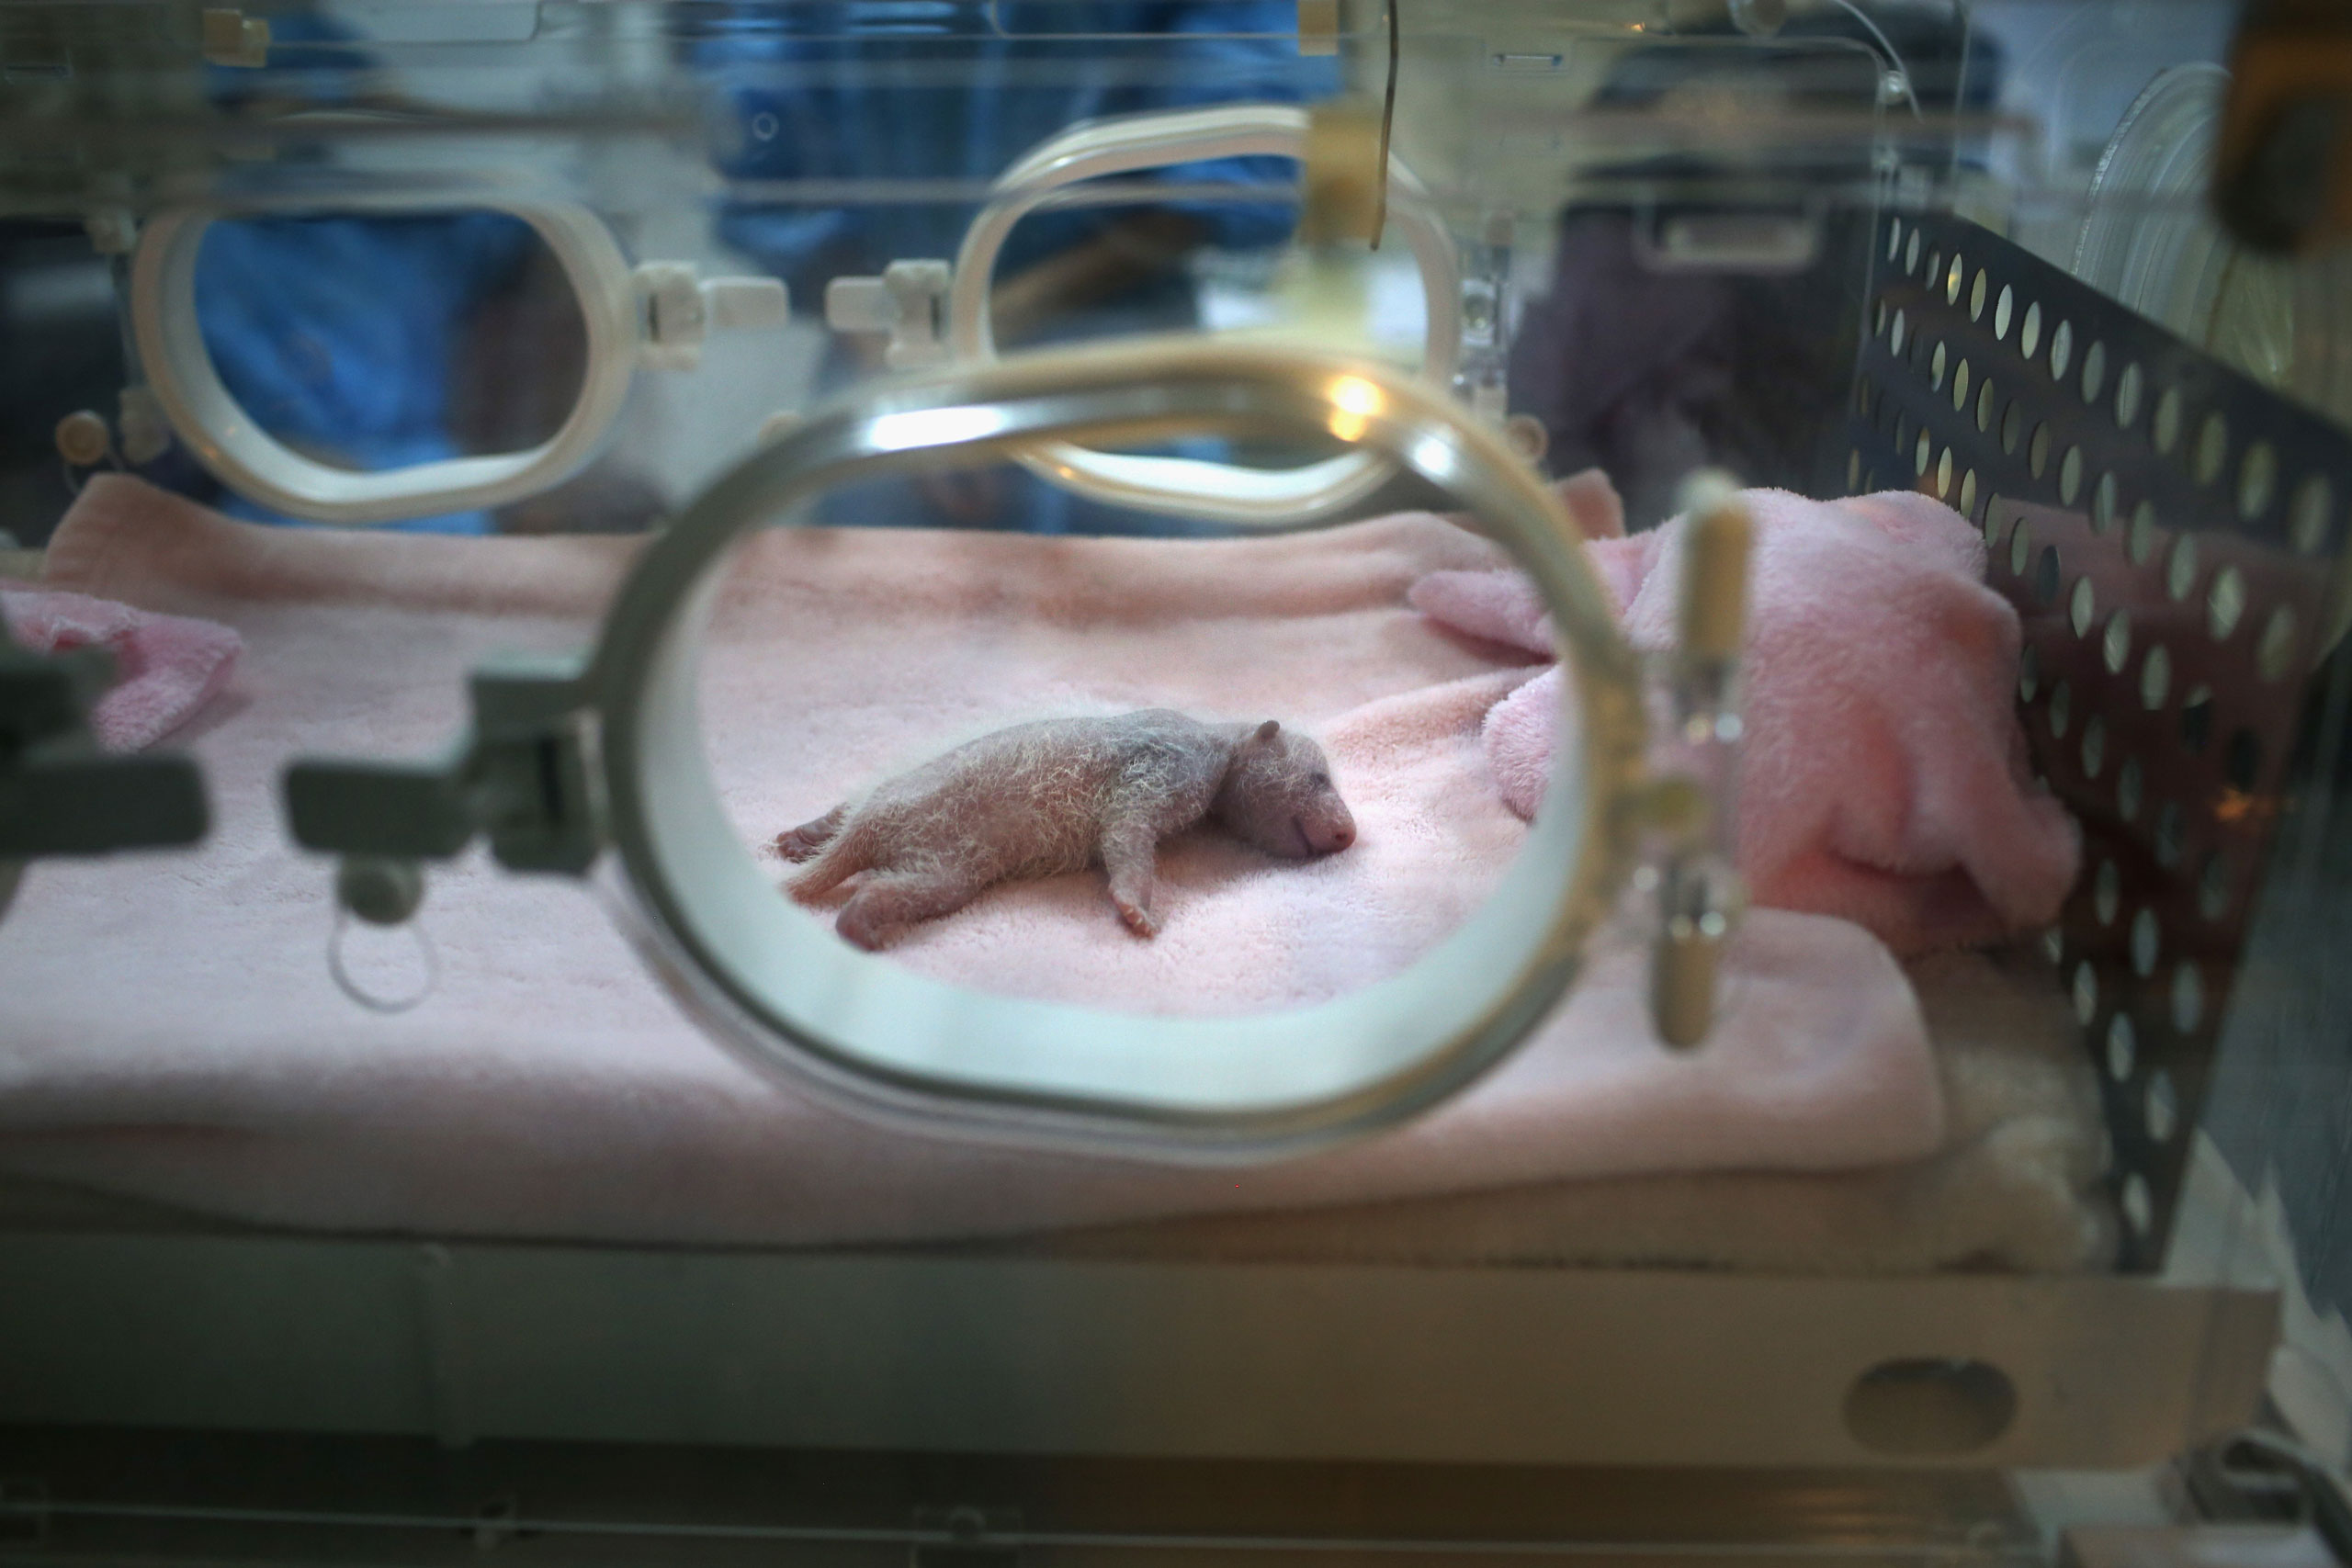 A week-old panda cub sleeps in an incubator at the Chengdu Research Base of Giant Panda Breeding in Chengdu, China, on June 30, 2015.
                              China's Sichuan province is home to the majority of the the world's nearly 1,900 endangered giant pandas.